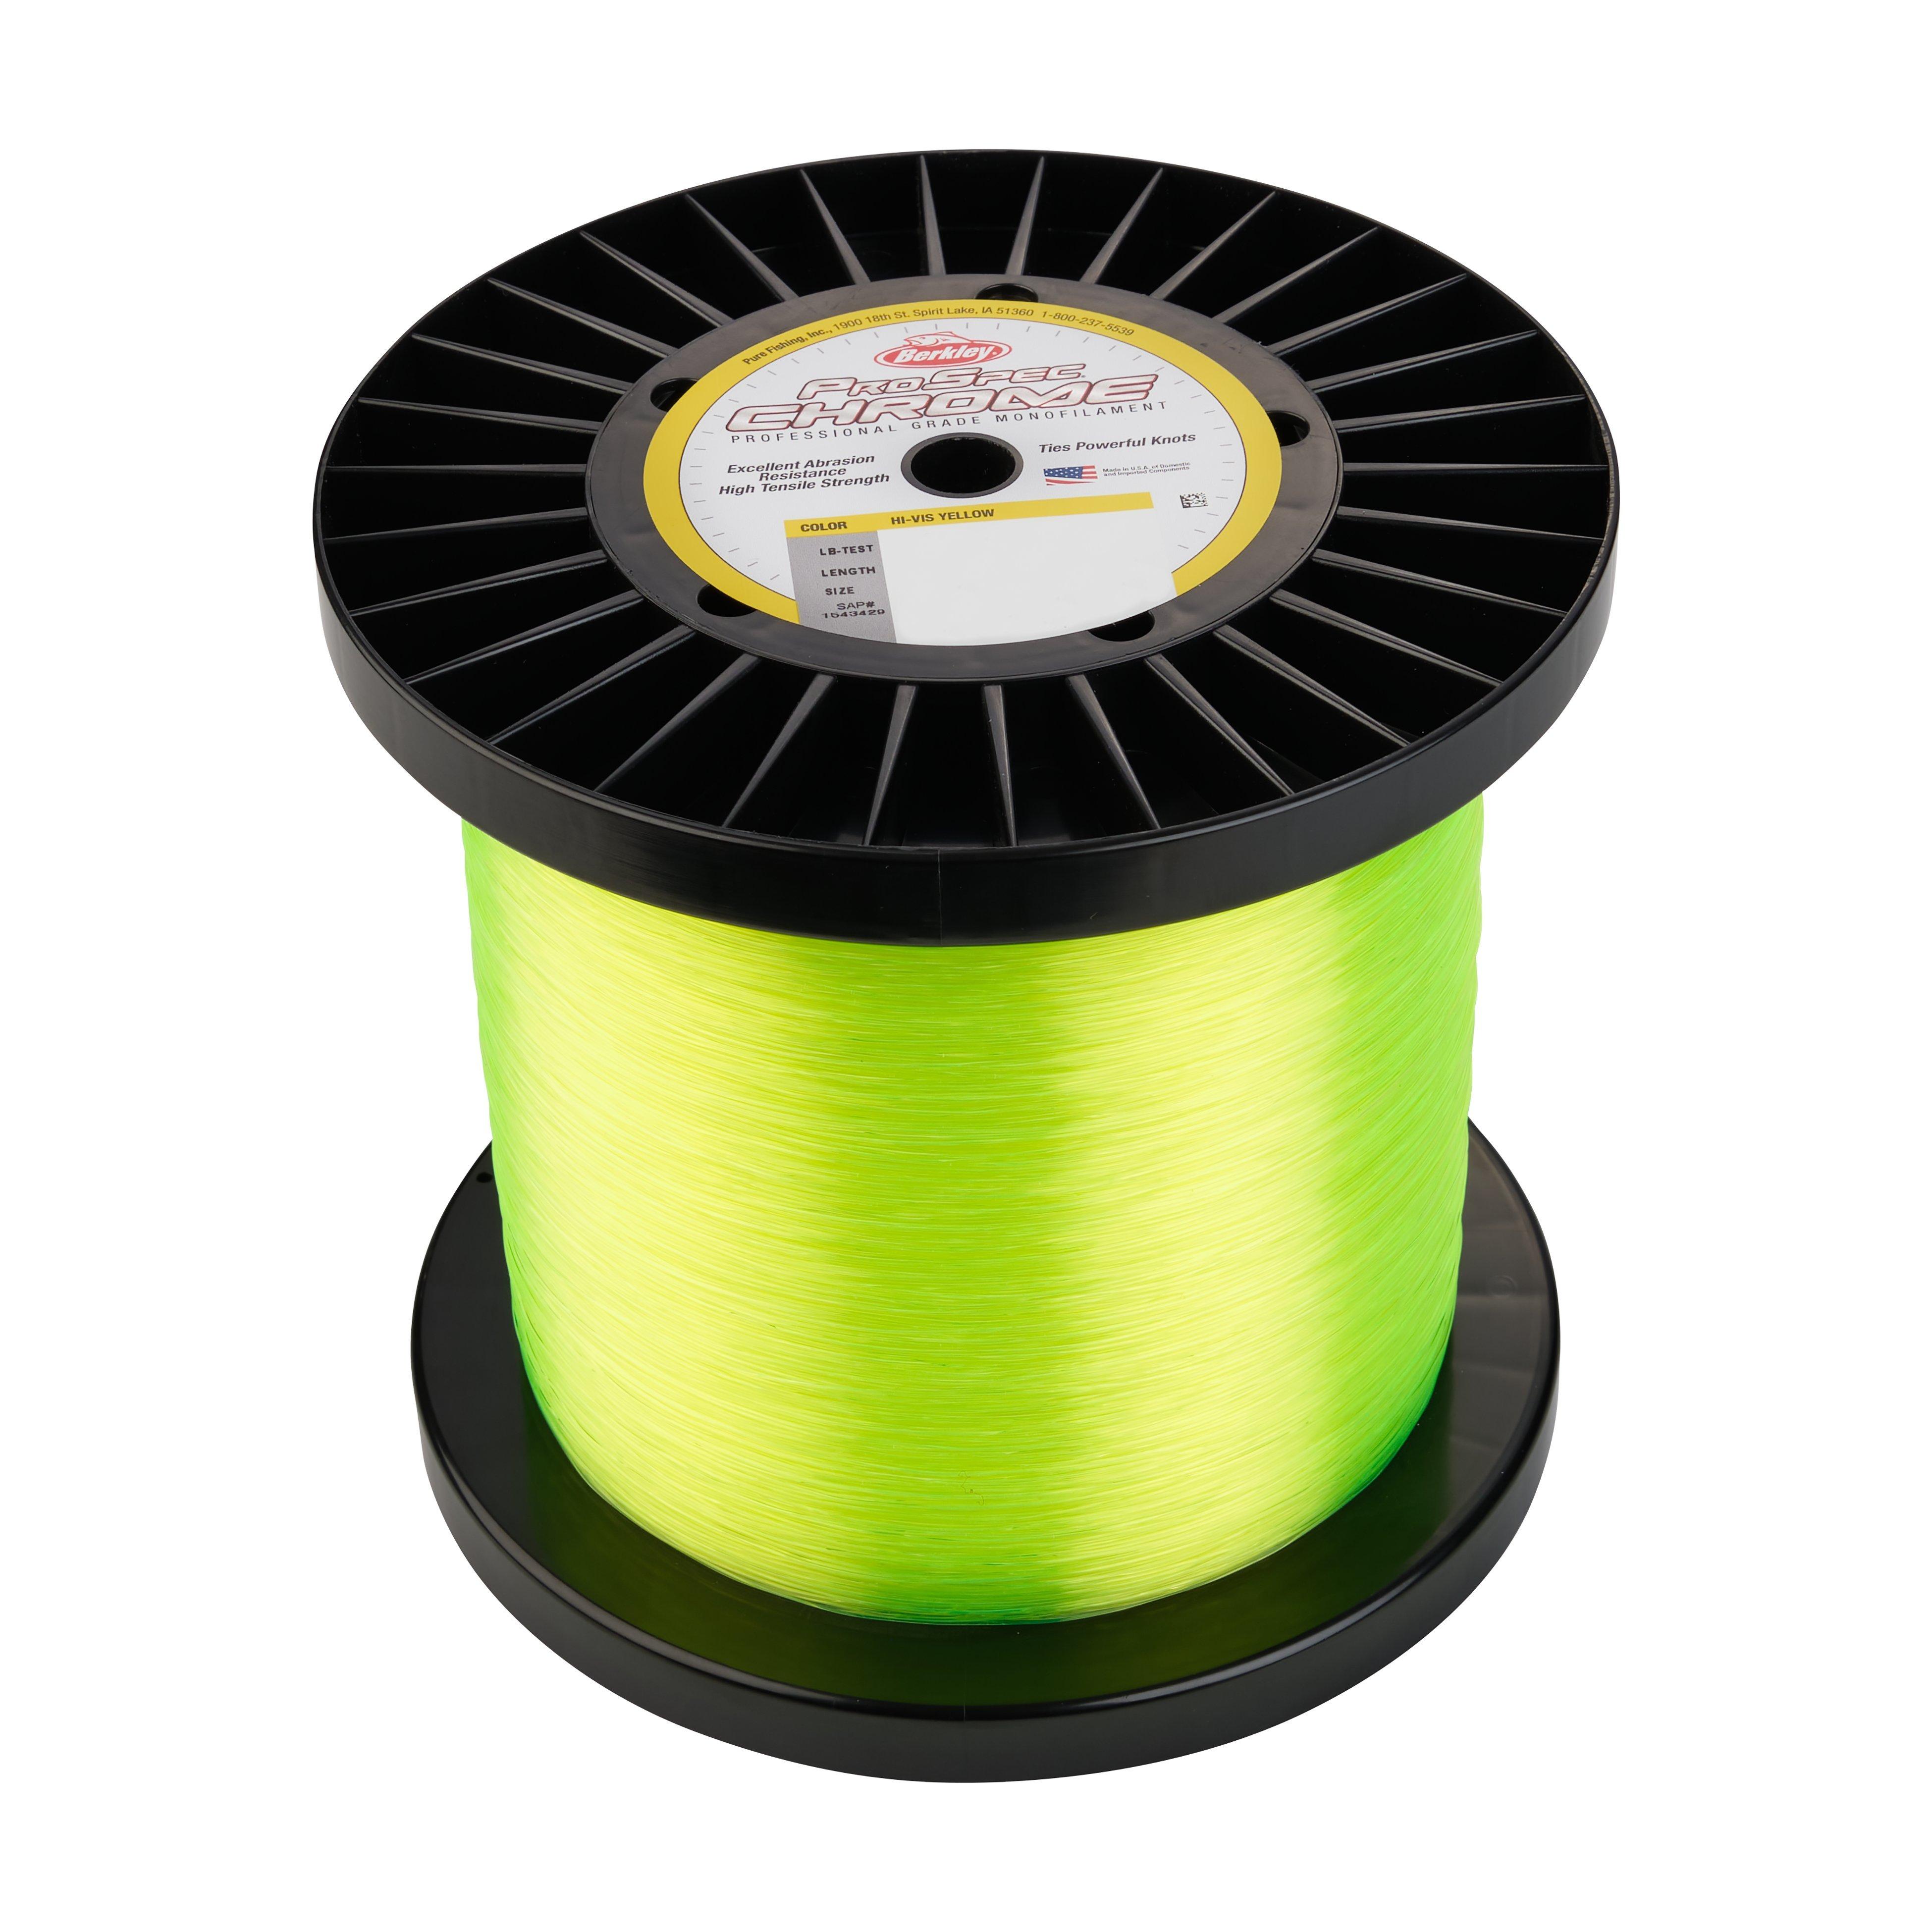 Fluorocarbon Leader Berkley Pro Spec 30lb Test 100yds Clear [HNR4475-5377]  - $38.99 : Almost Alive Lures, The best there ever was.